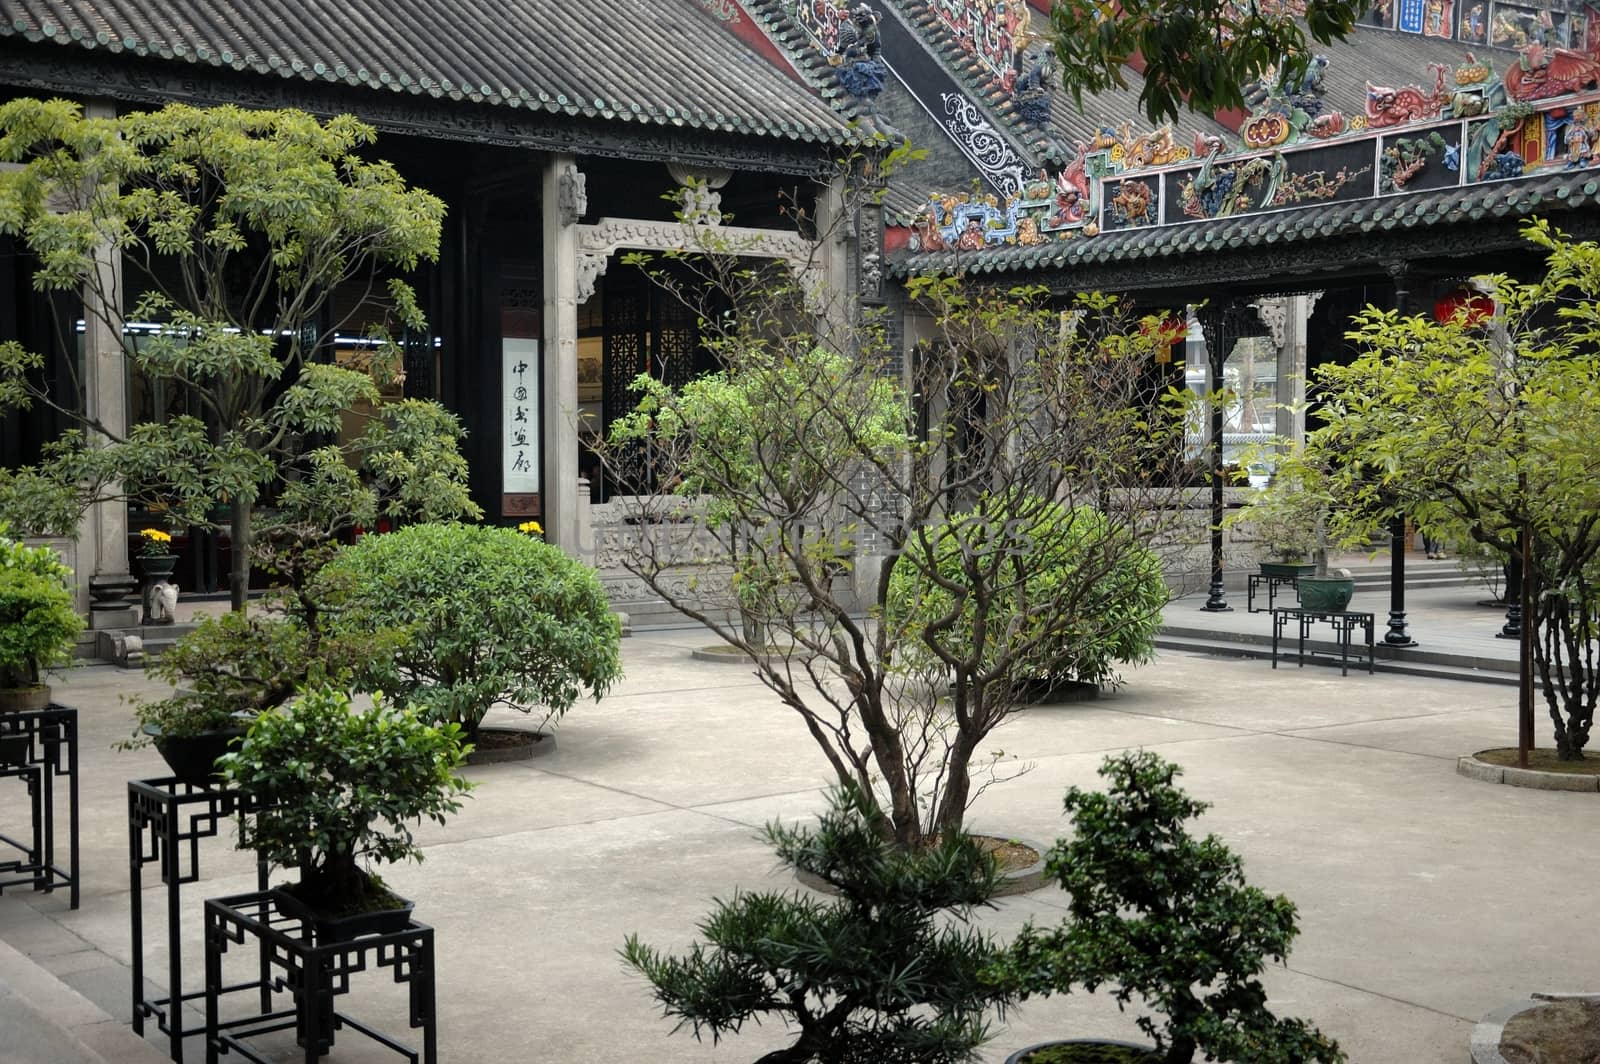 Chen Family Temple, traditional Chinese architecture in Guangzhou. Unique buildings and atriums with bonsai bushes.